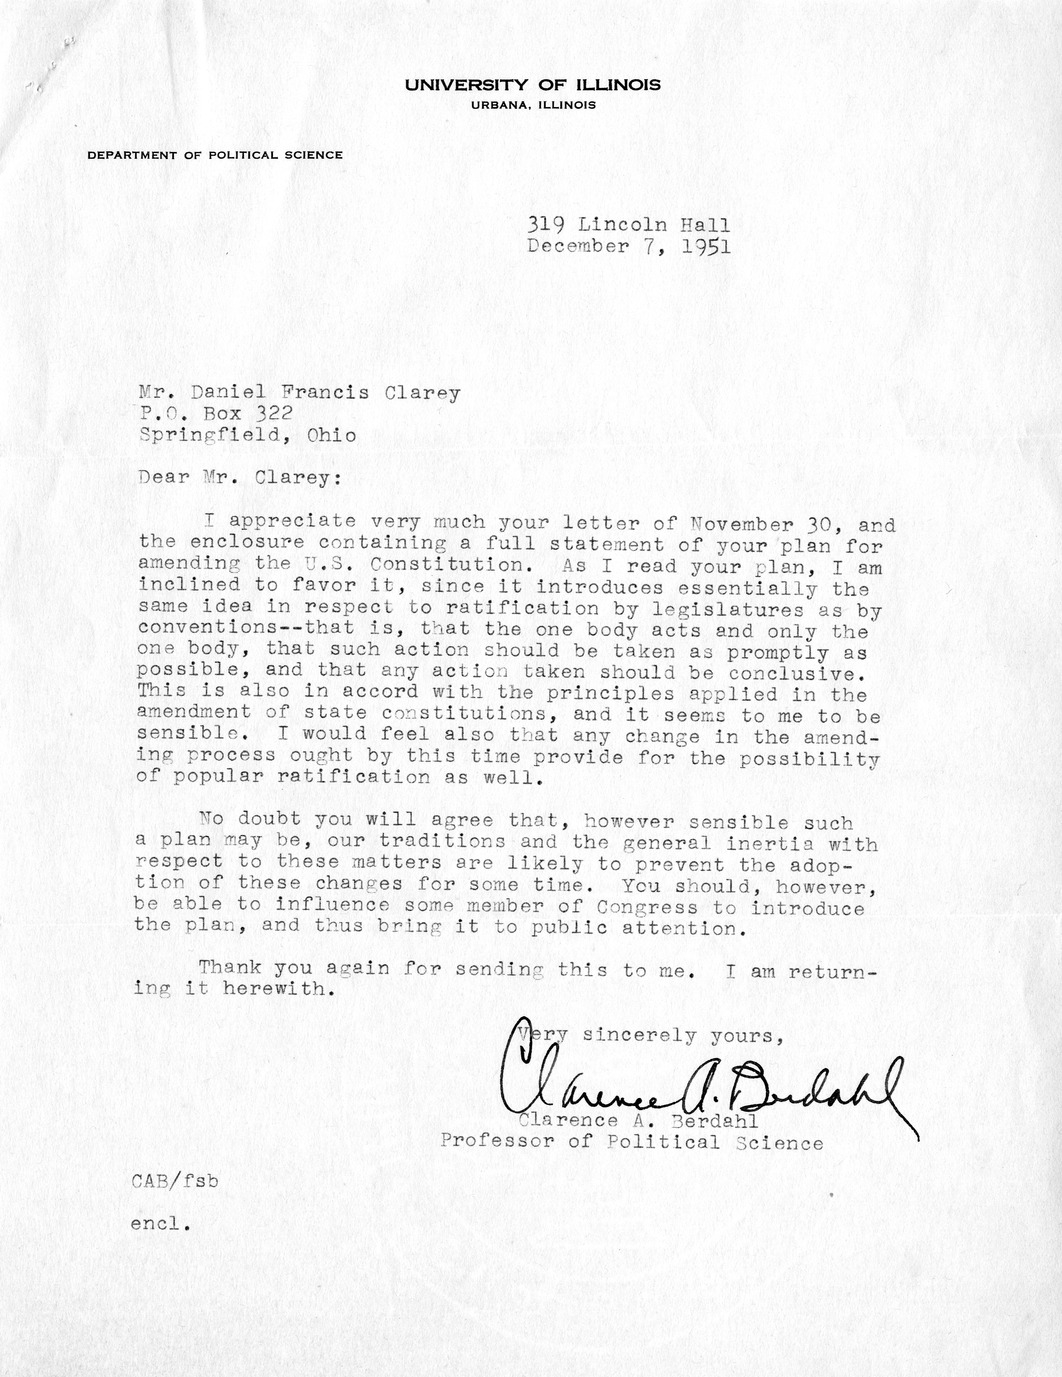 Letter from Clarence A. Berdahl to Daniel F. Clancy, with Attachment